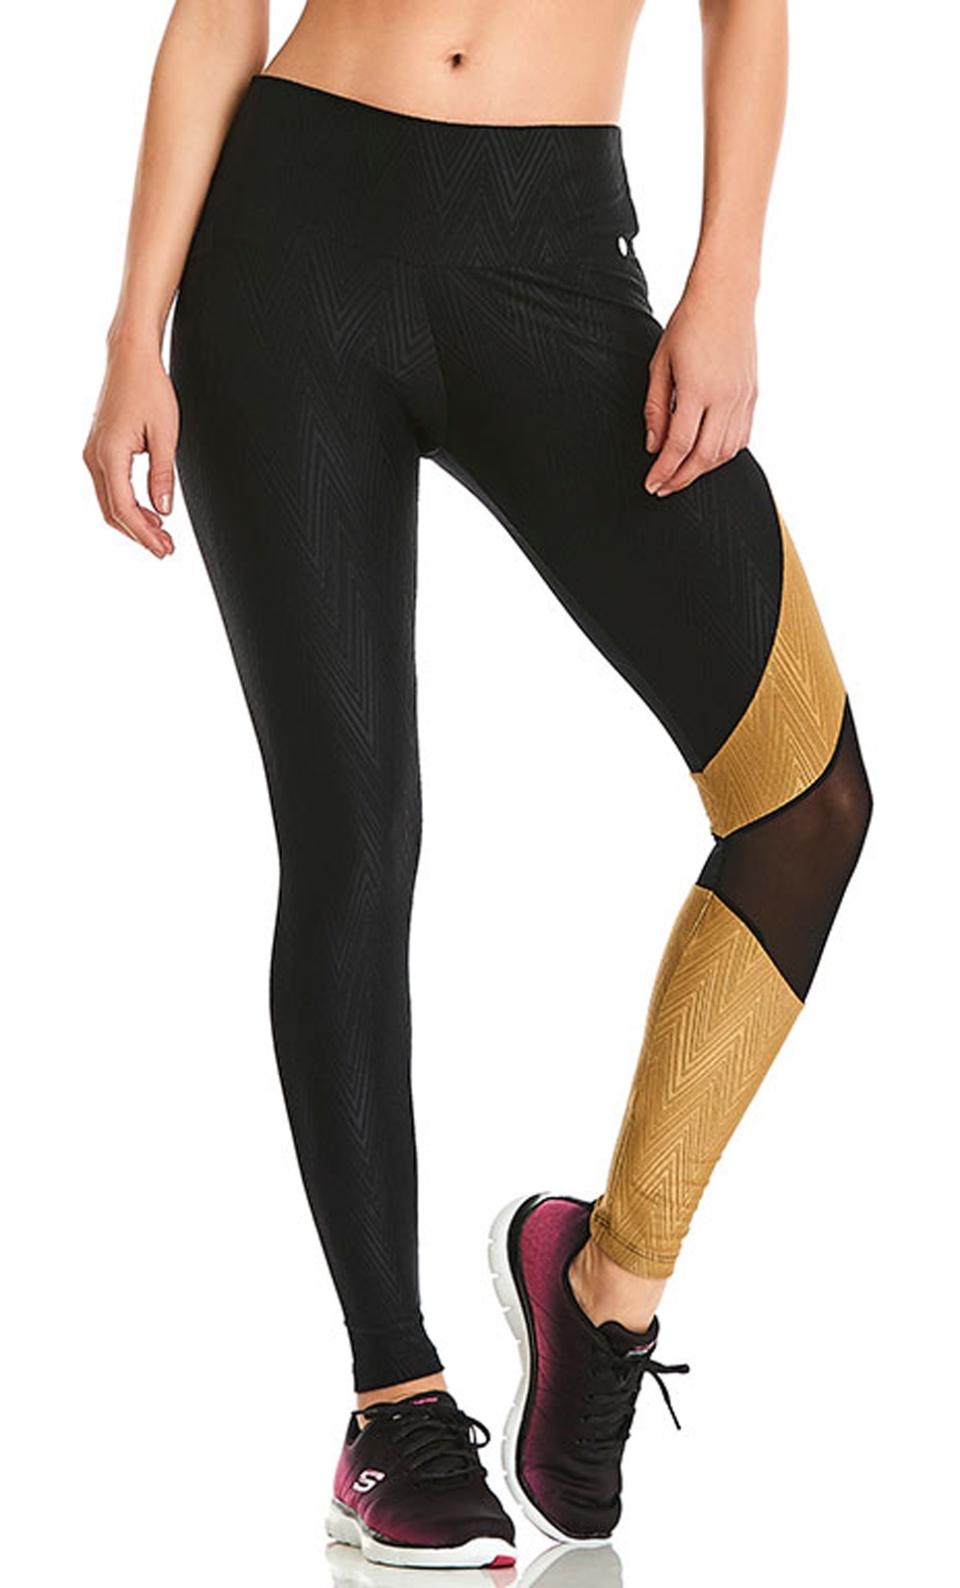 What Are Some Tips for Wearing Activewear Fashion Fitness Leggings Casually?